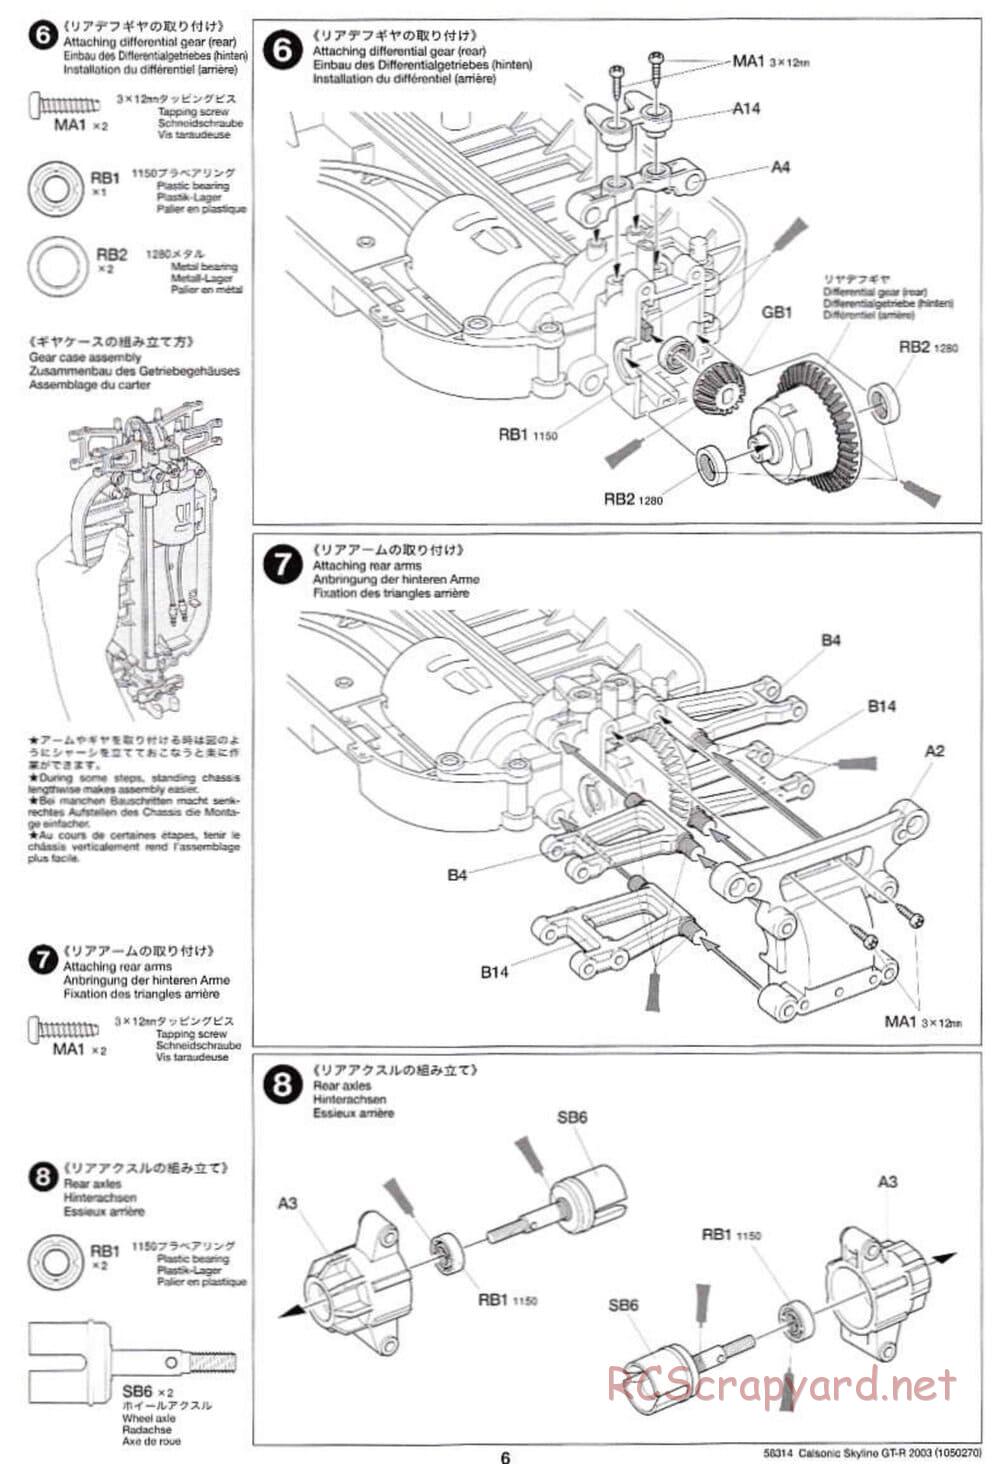 Tamiya - Calsonic Skyline GT-R 2003 - TT-01 Chassis - Manual - Page 6